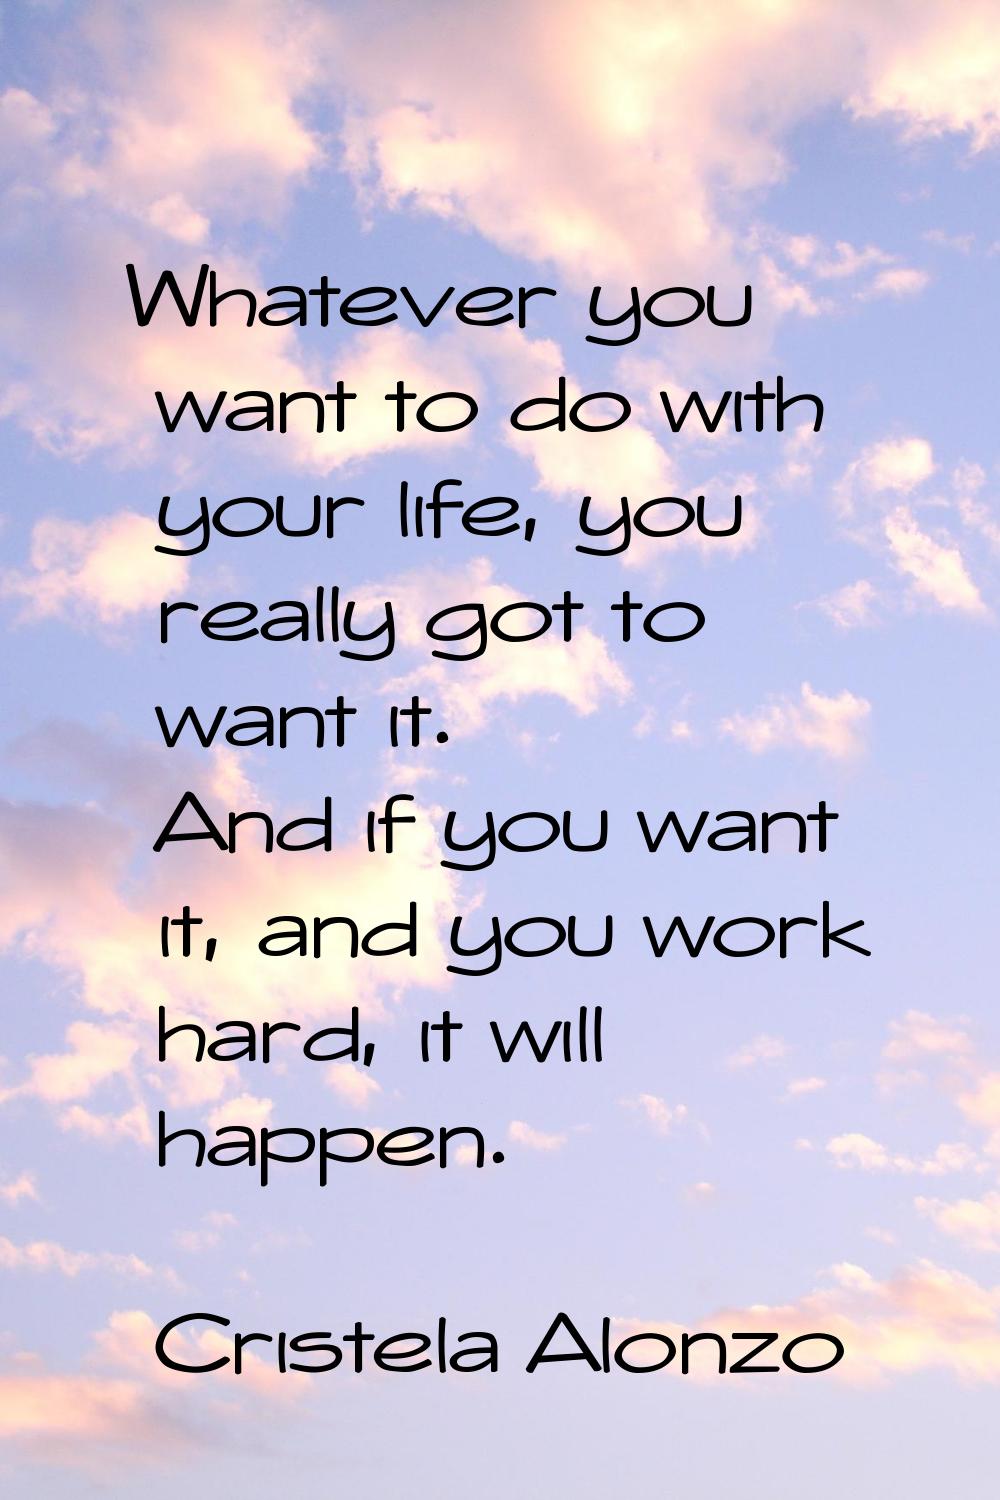 Whatever you want to do with your life, you really got to want it. And if you want it, and you work